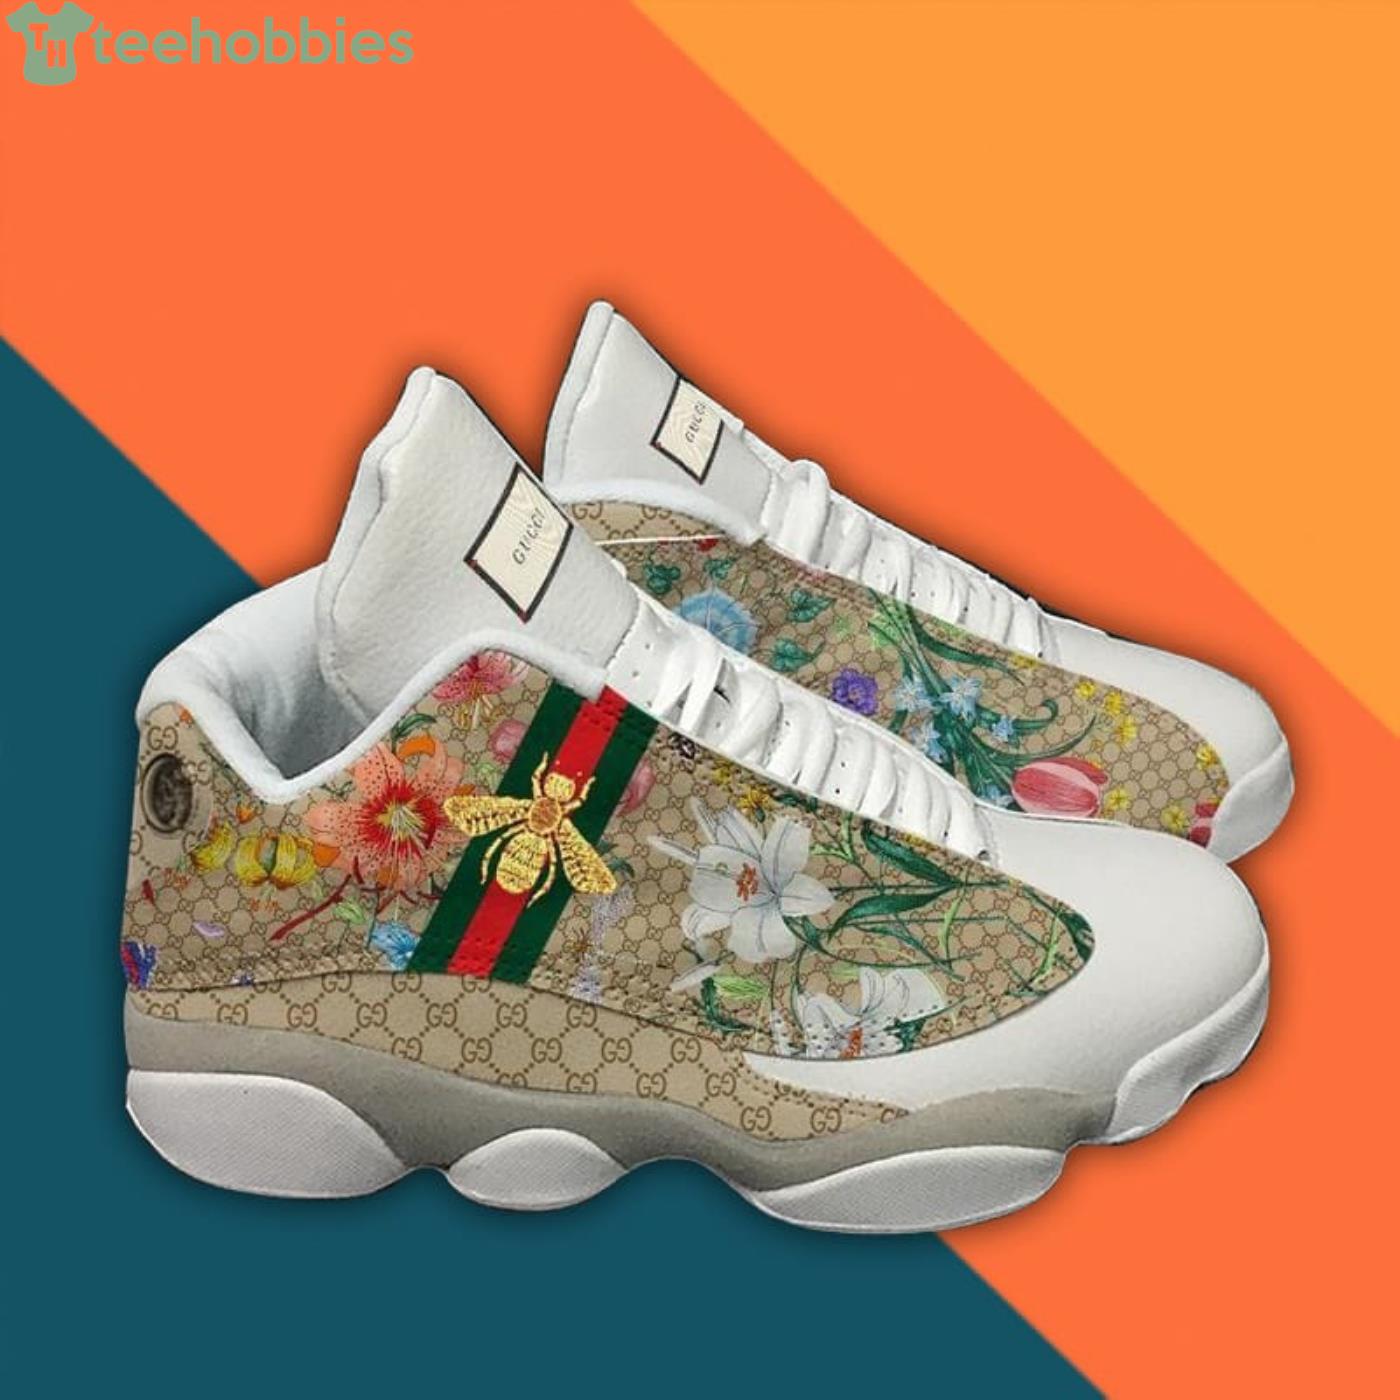 Gucci Bee And Flower Air Jordan 13 Sneaker Shoes